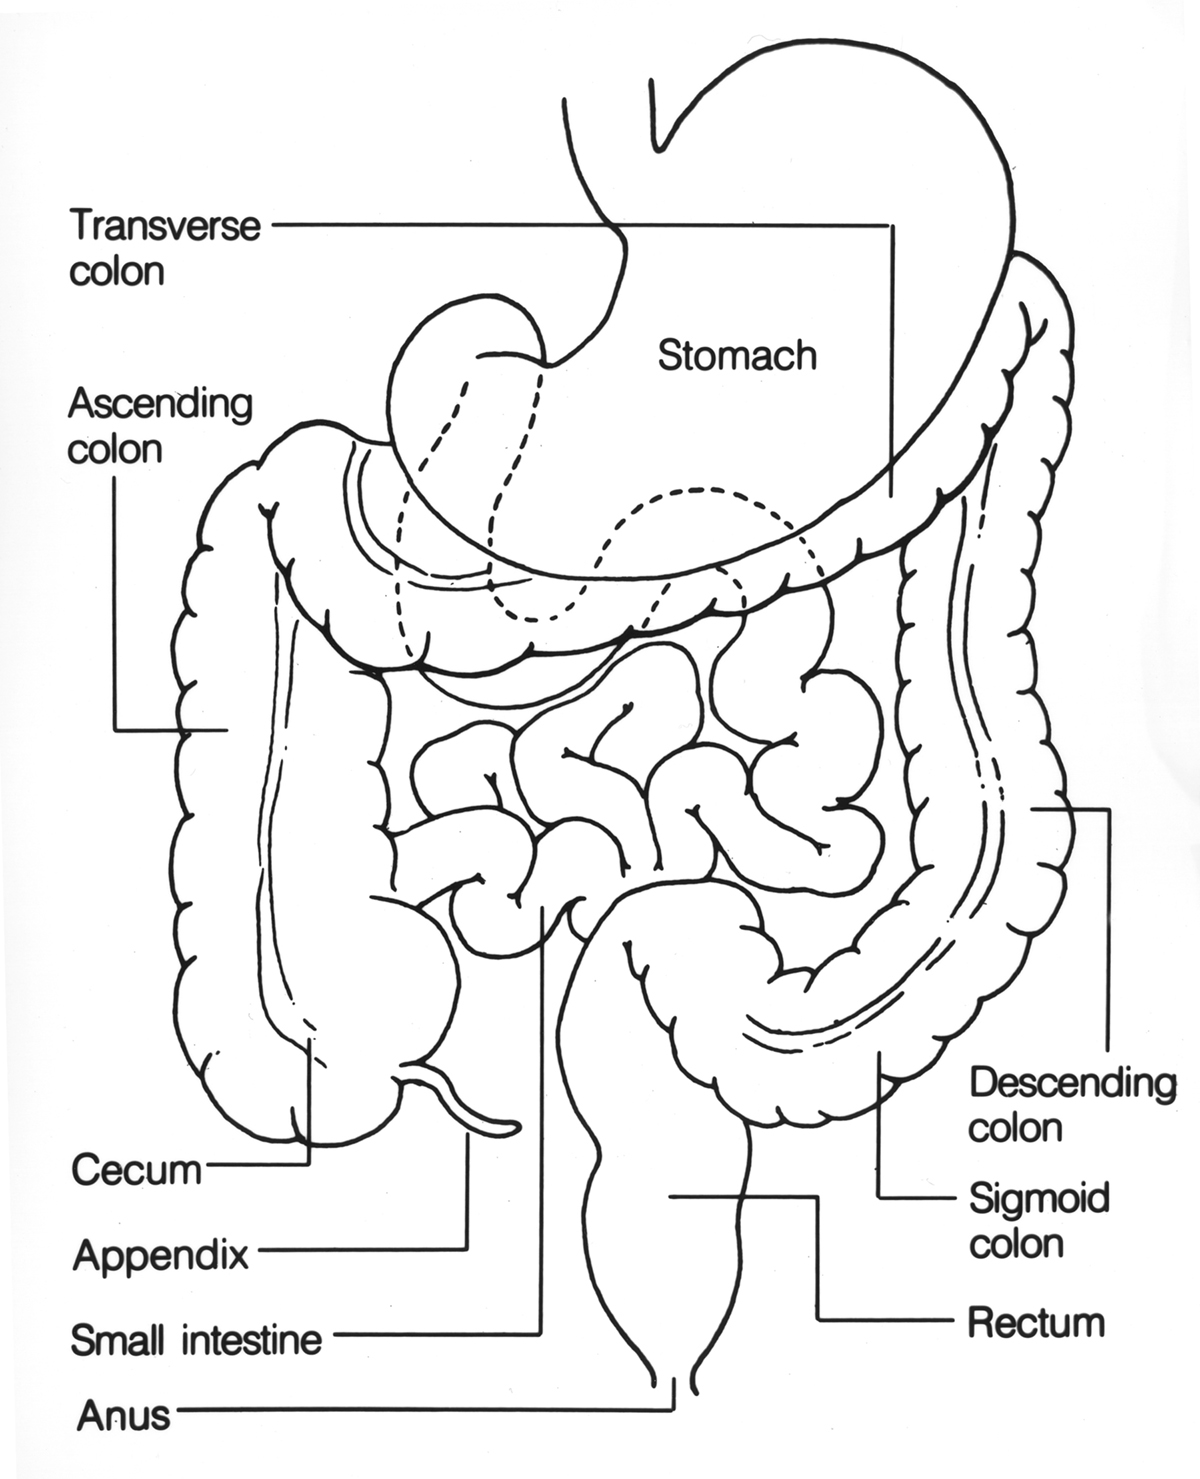 Anatomy and physiology of the colon General center